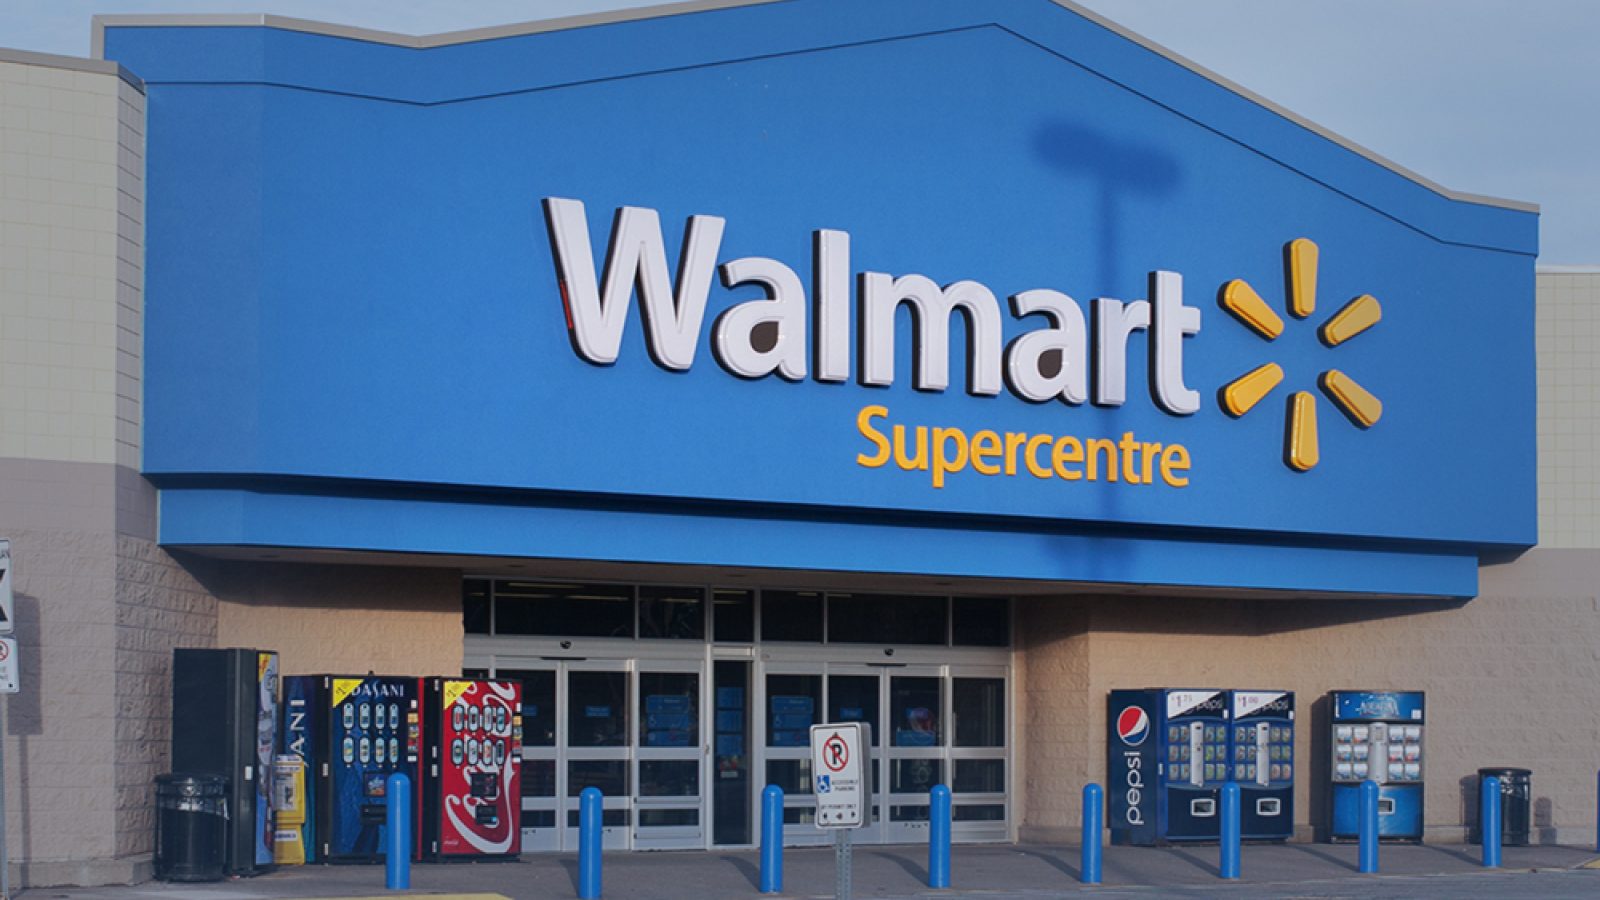 Find Walmart Near Me and Read About Best Walmart Stores